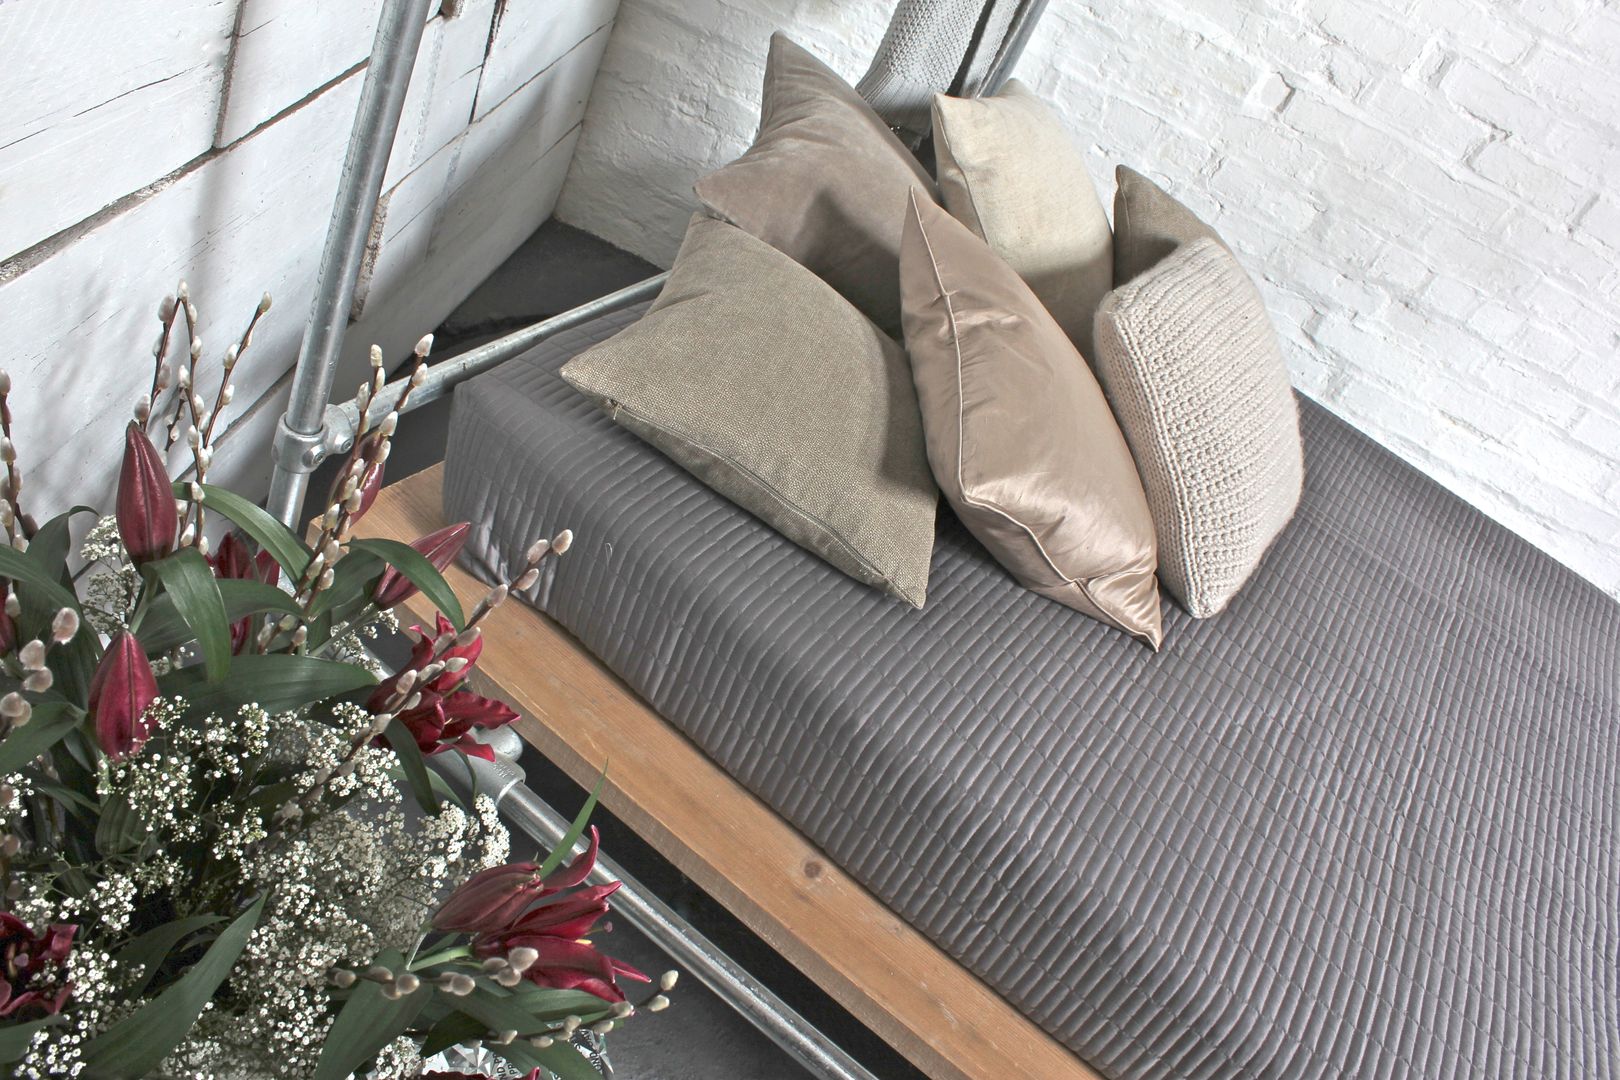 Galvanised Steel Pipe and Reclaimed Scaffolding Board Kingsize Bed - Bespoke Urban Furniture by www.inspiritdeco.com homify Bedroom Beds & headboards